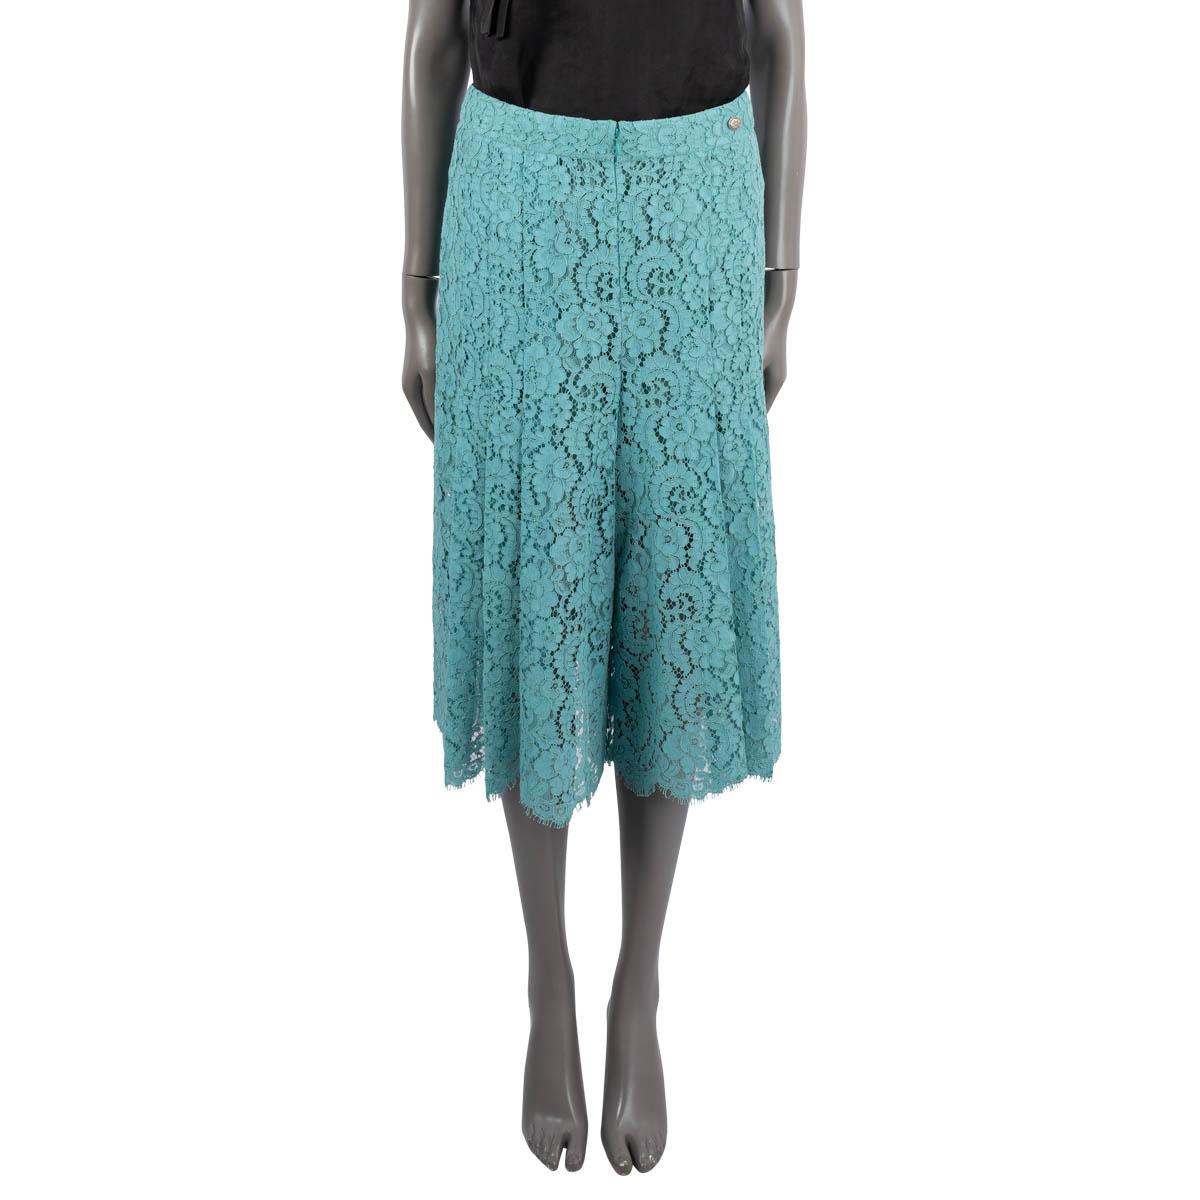 100% authentic Chanel lace culotte trousers in turquoise cotton (68%), viscose (27%) and polyamide (5%). Features a floral button at the waist. Closes with a hidden zipper and the upper part is lined with silk (100%). Have been worn and are in